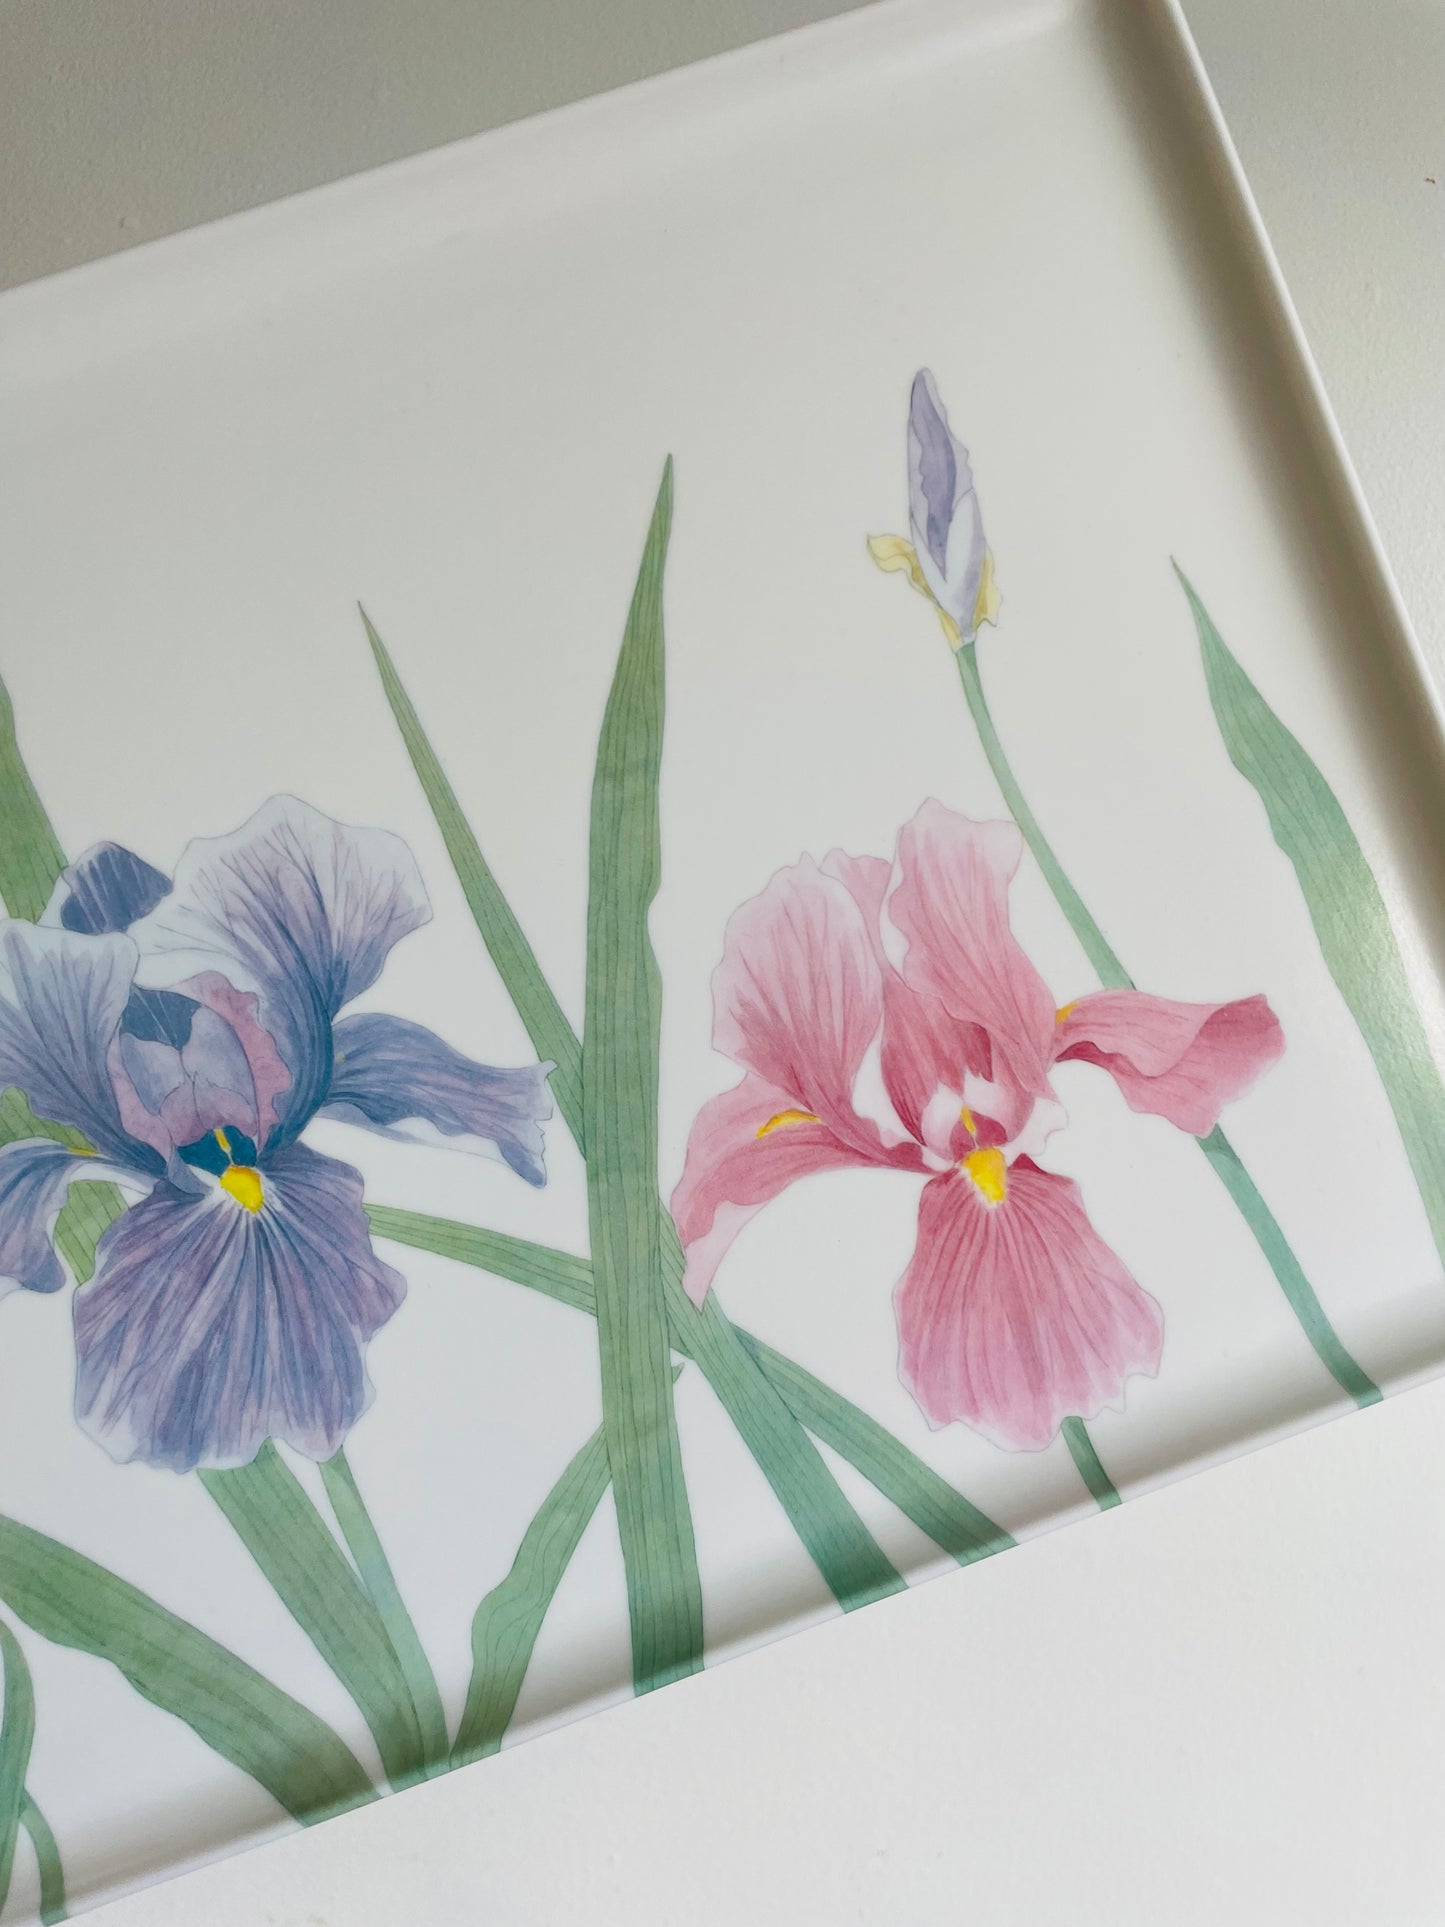 Mebel Melamine Serving or Decorative Tray with Purple & Pink Iris Flowers - Made in Italy